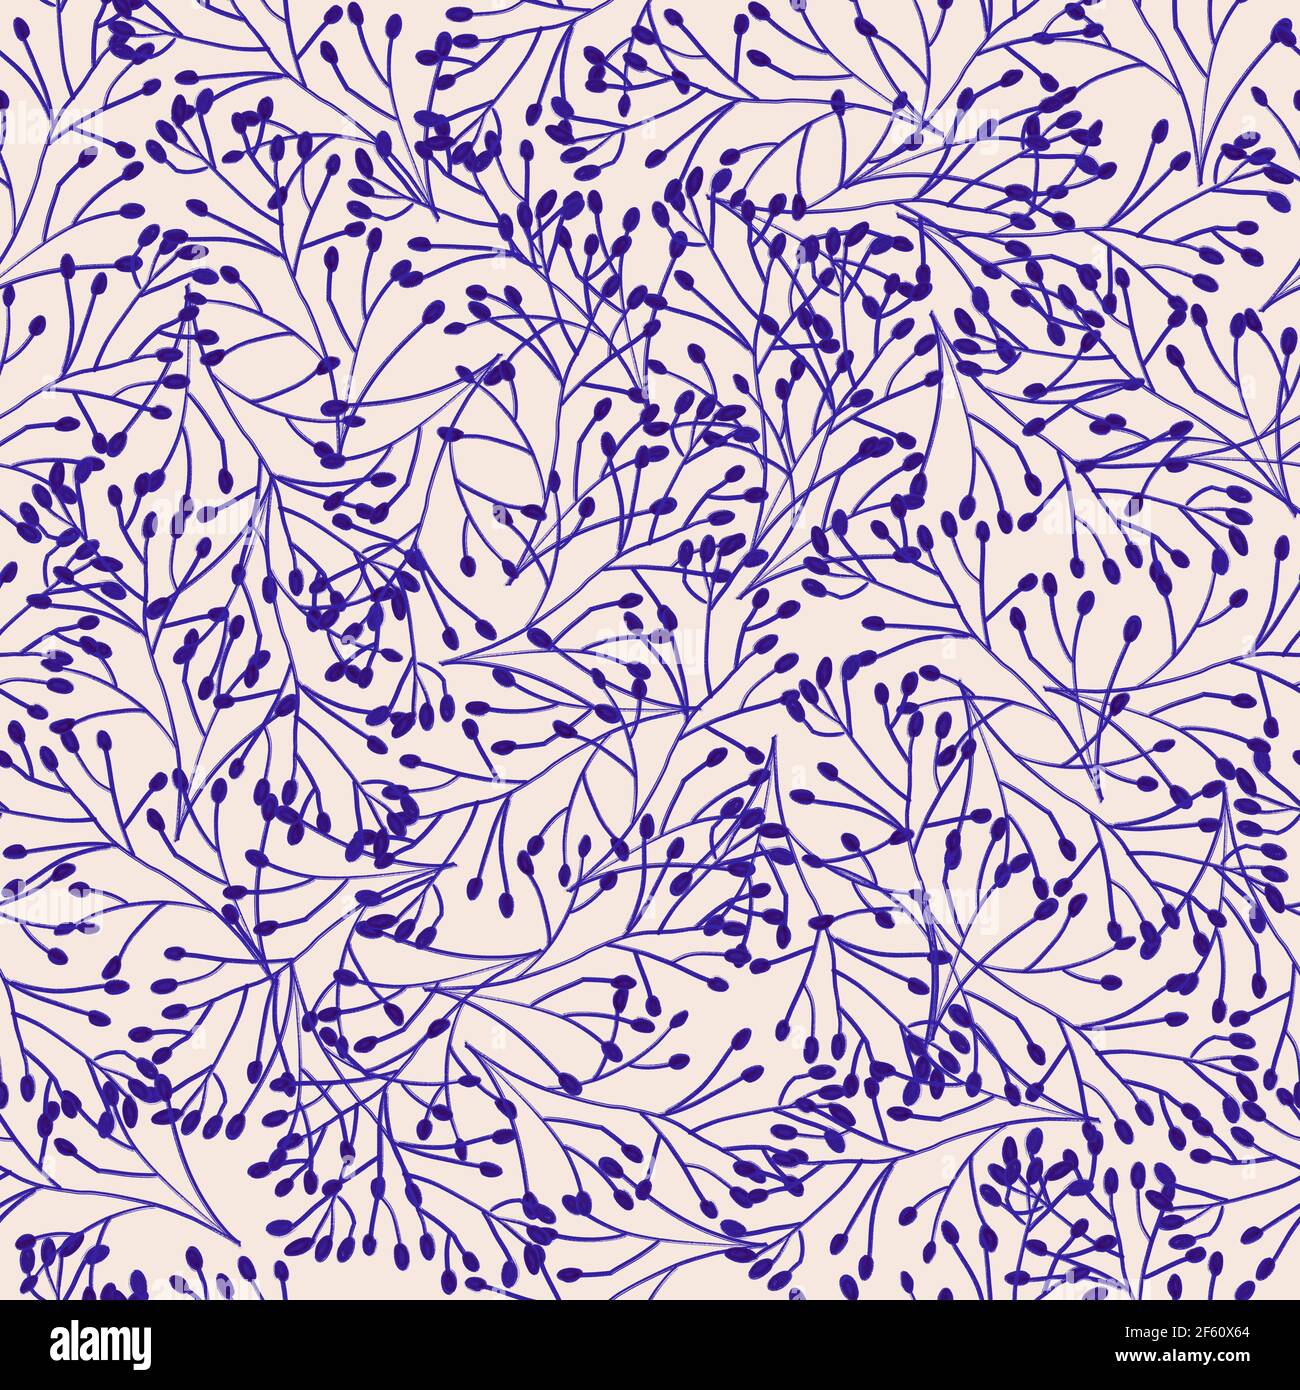 Blue beige seamless background from blue hand drawn contour flowers. Repeating abstract nature texture for fabric, tiles, wallpaper. Blue ink Stock Photo